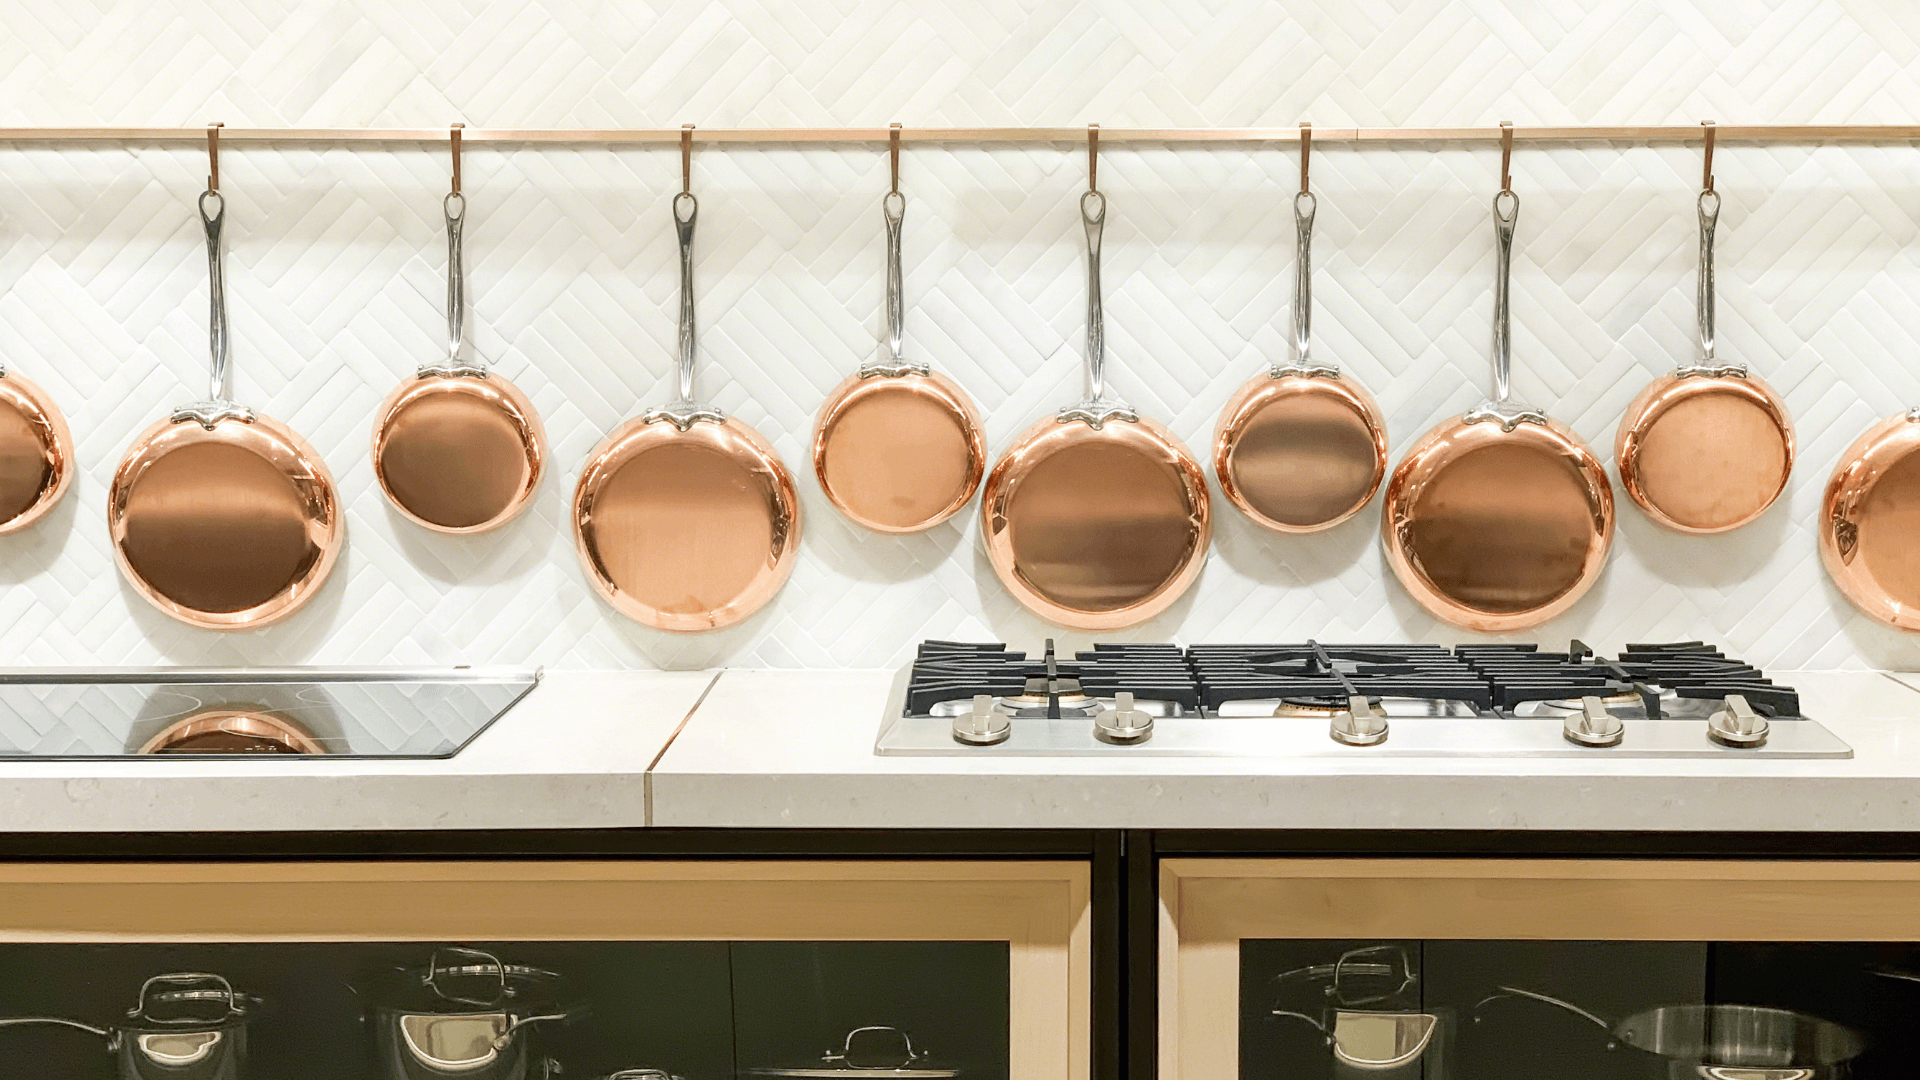 How to clean copper pans